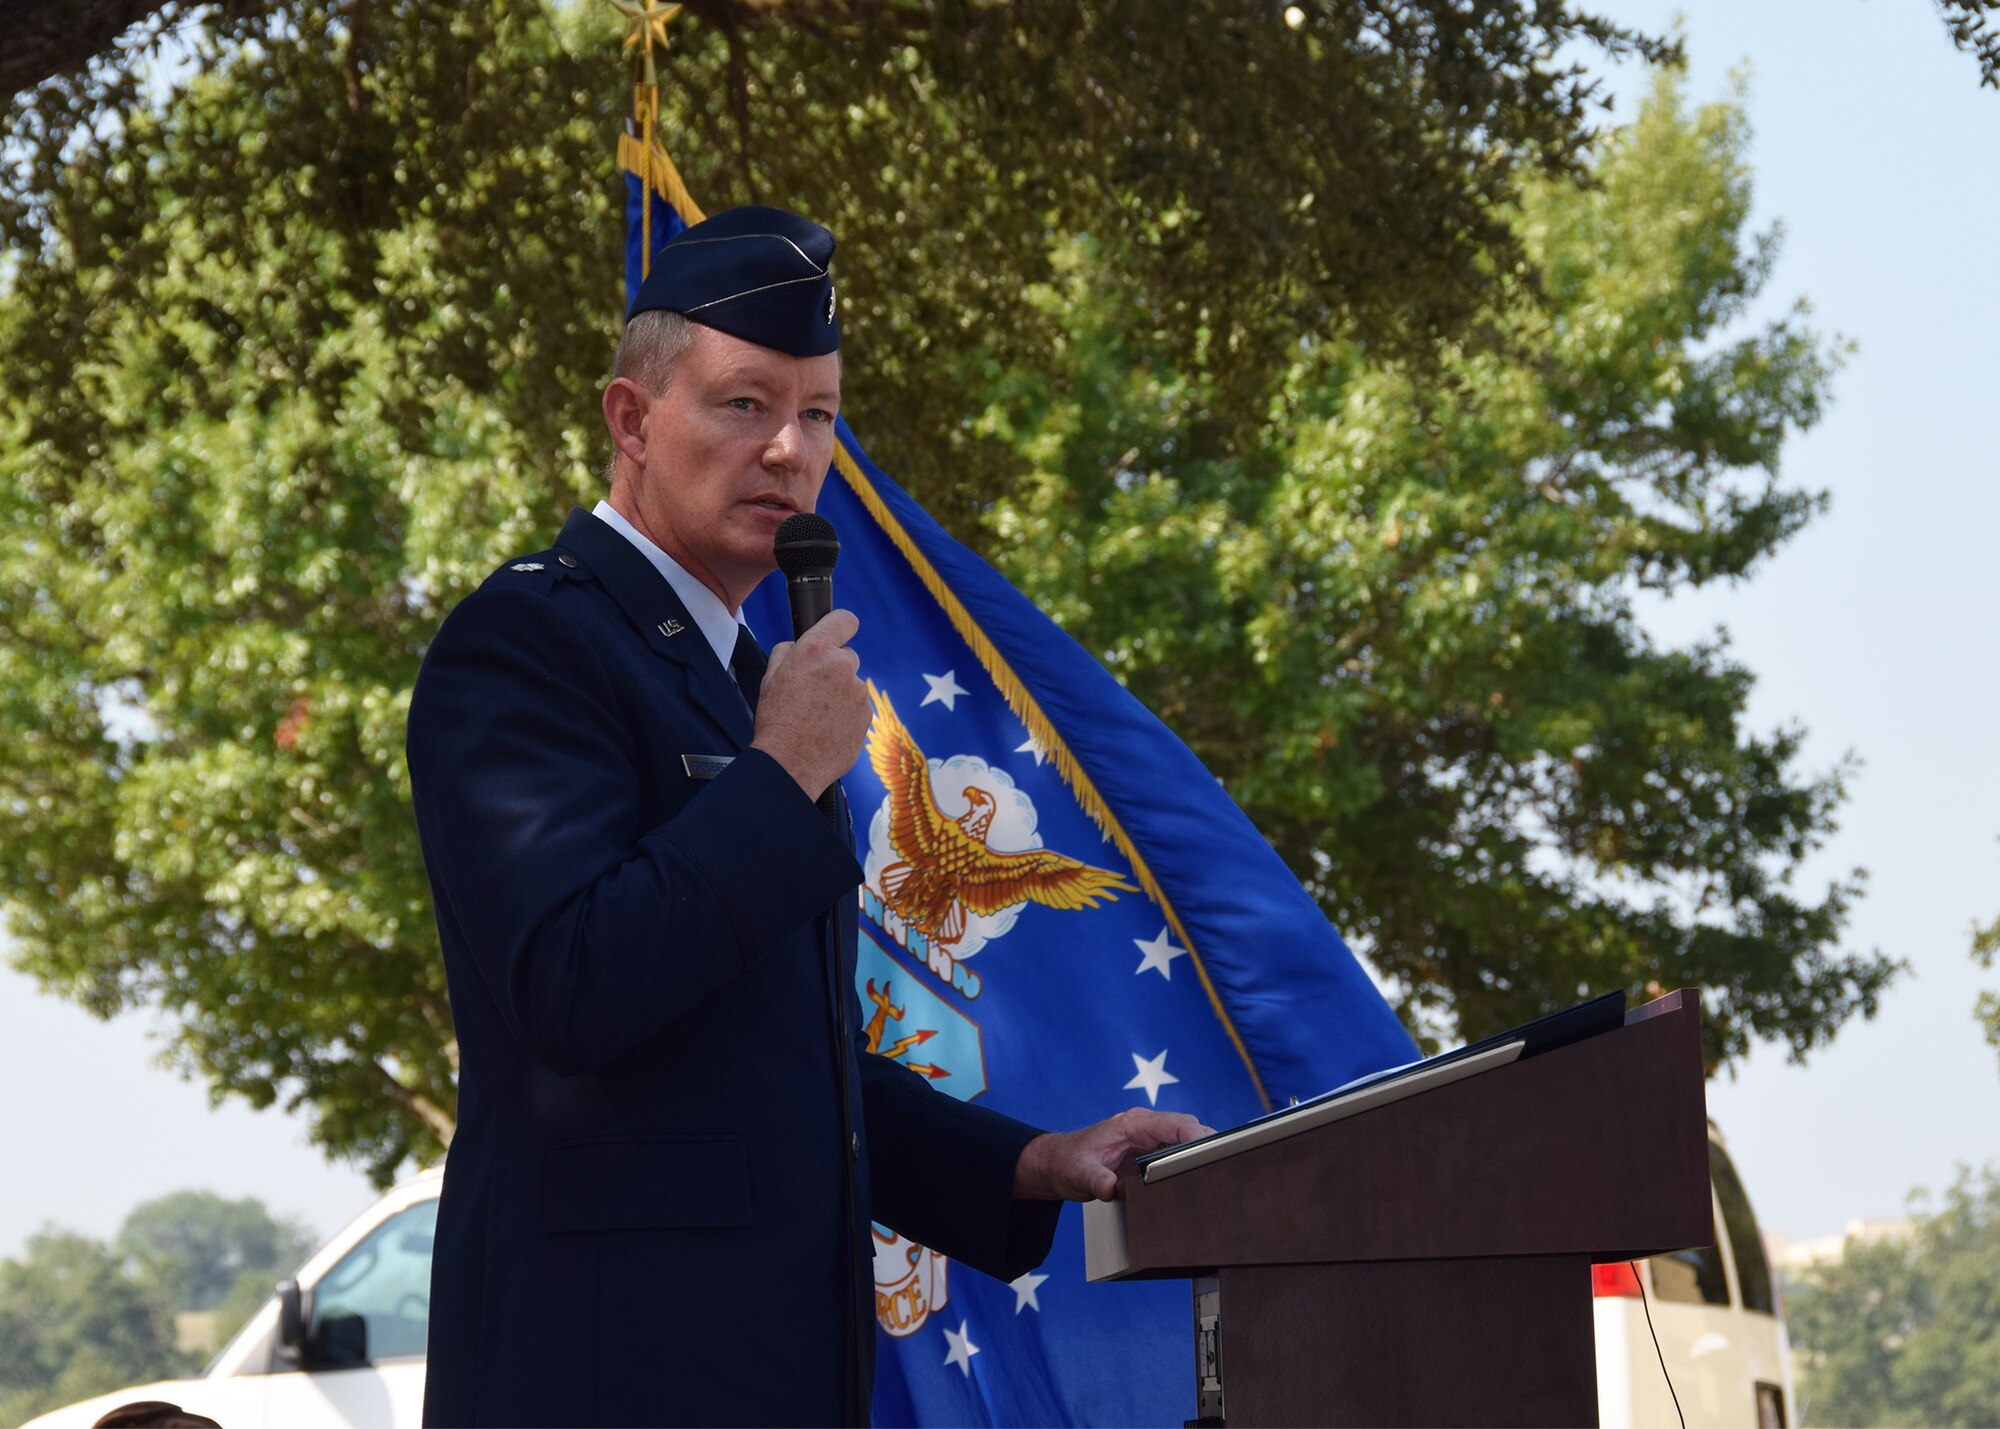 Lt. Col. Douglas P. Schoenenberger, 68th Airlift Squadron commander and ceremony narrator, speaks during the remembrance and wreath laying ceremony for the 30th anniversary of the BRAVO-12 mission held Aug. 28, 2020 at Joint Base San Antonio-Lackland, Texas.